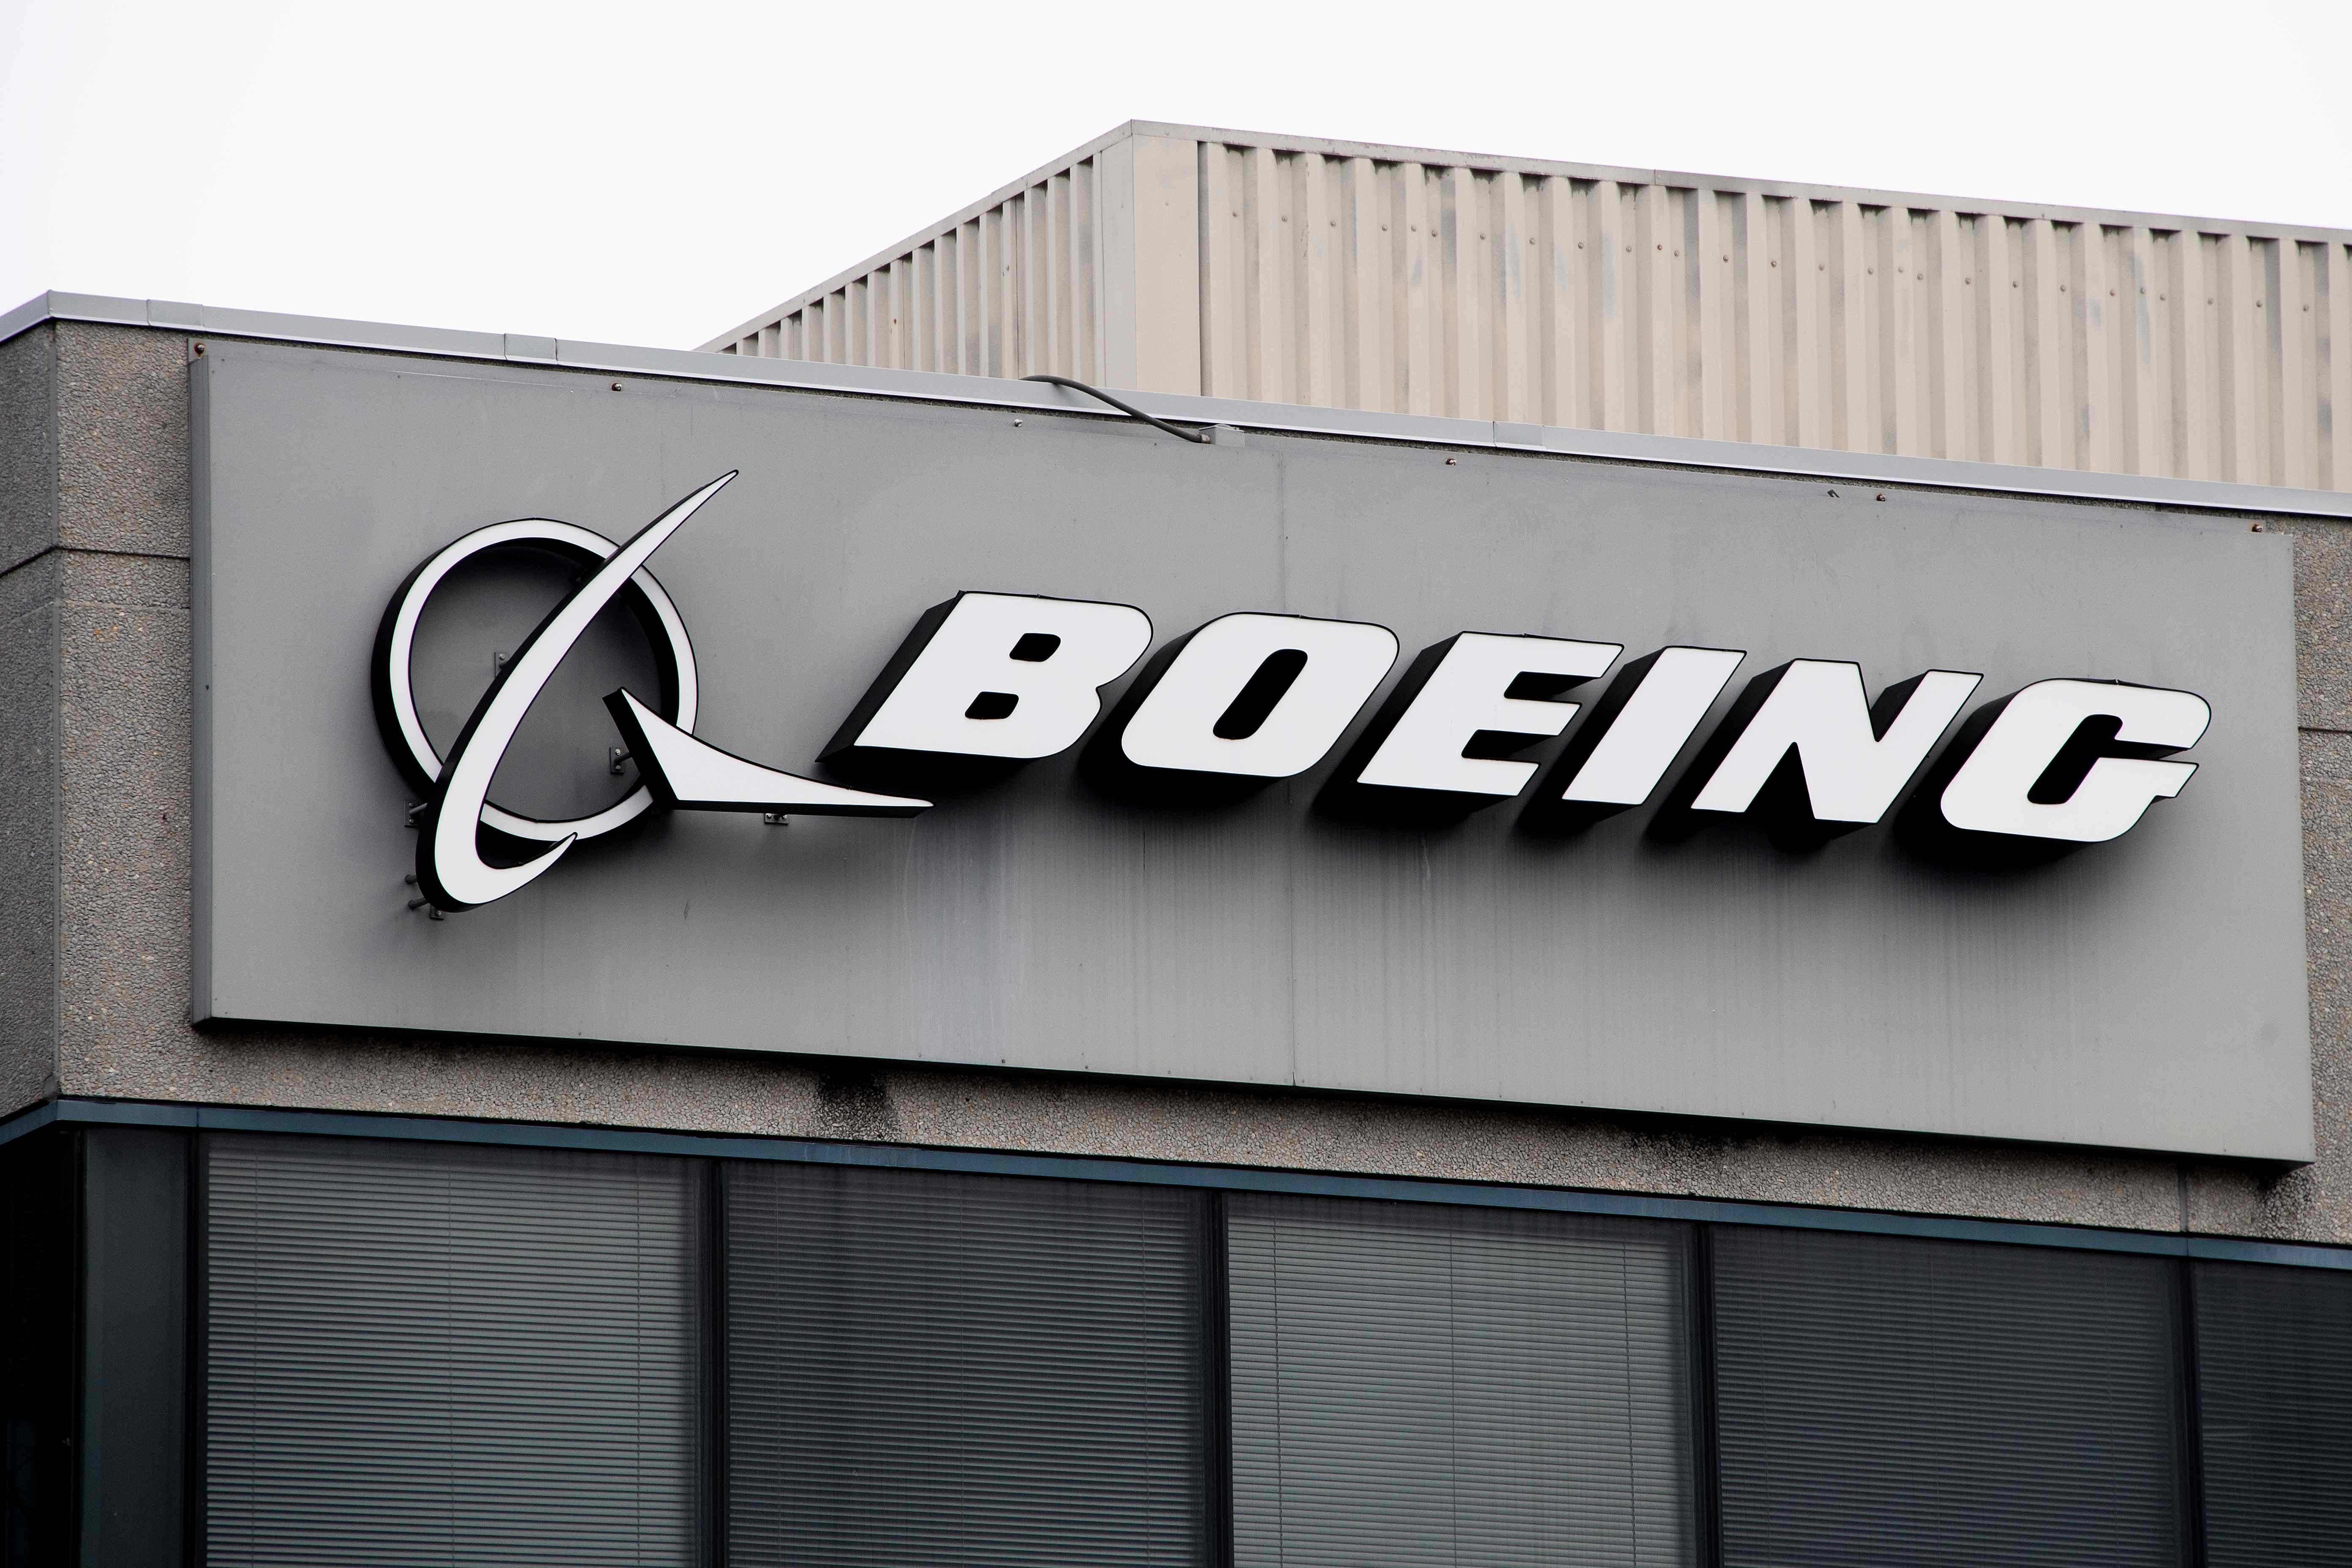 Boeing plans to move 150 jobs to Texas from California and Washington state